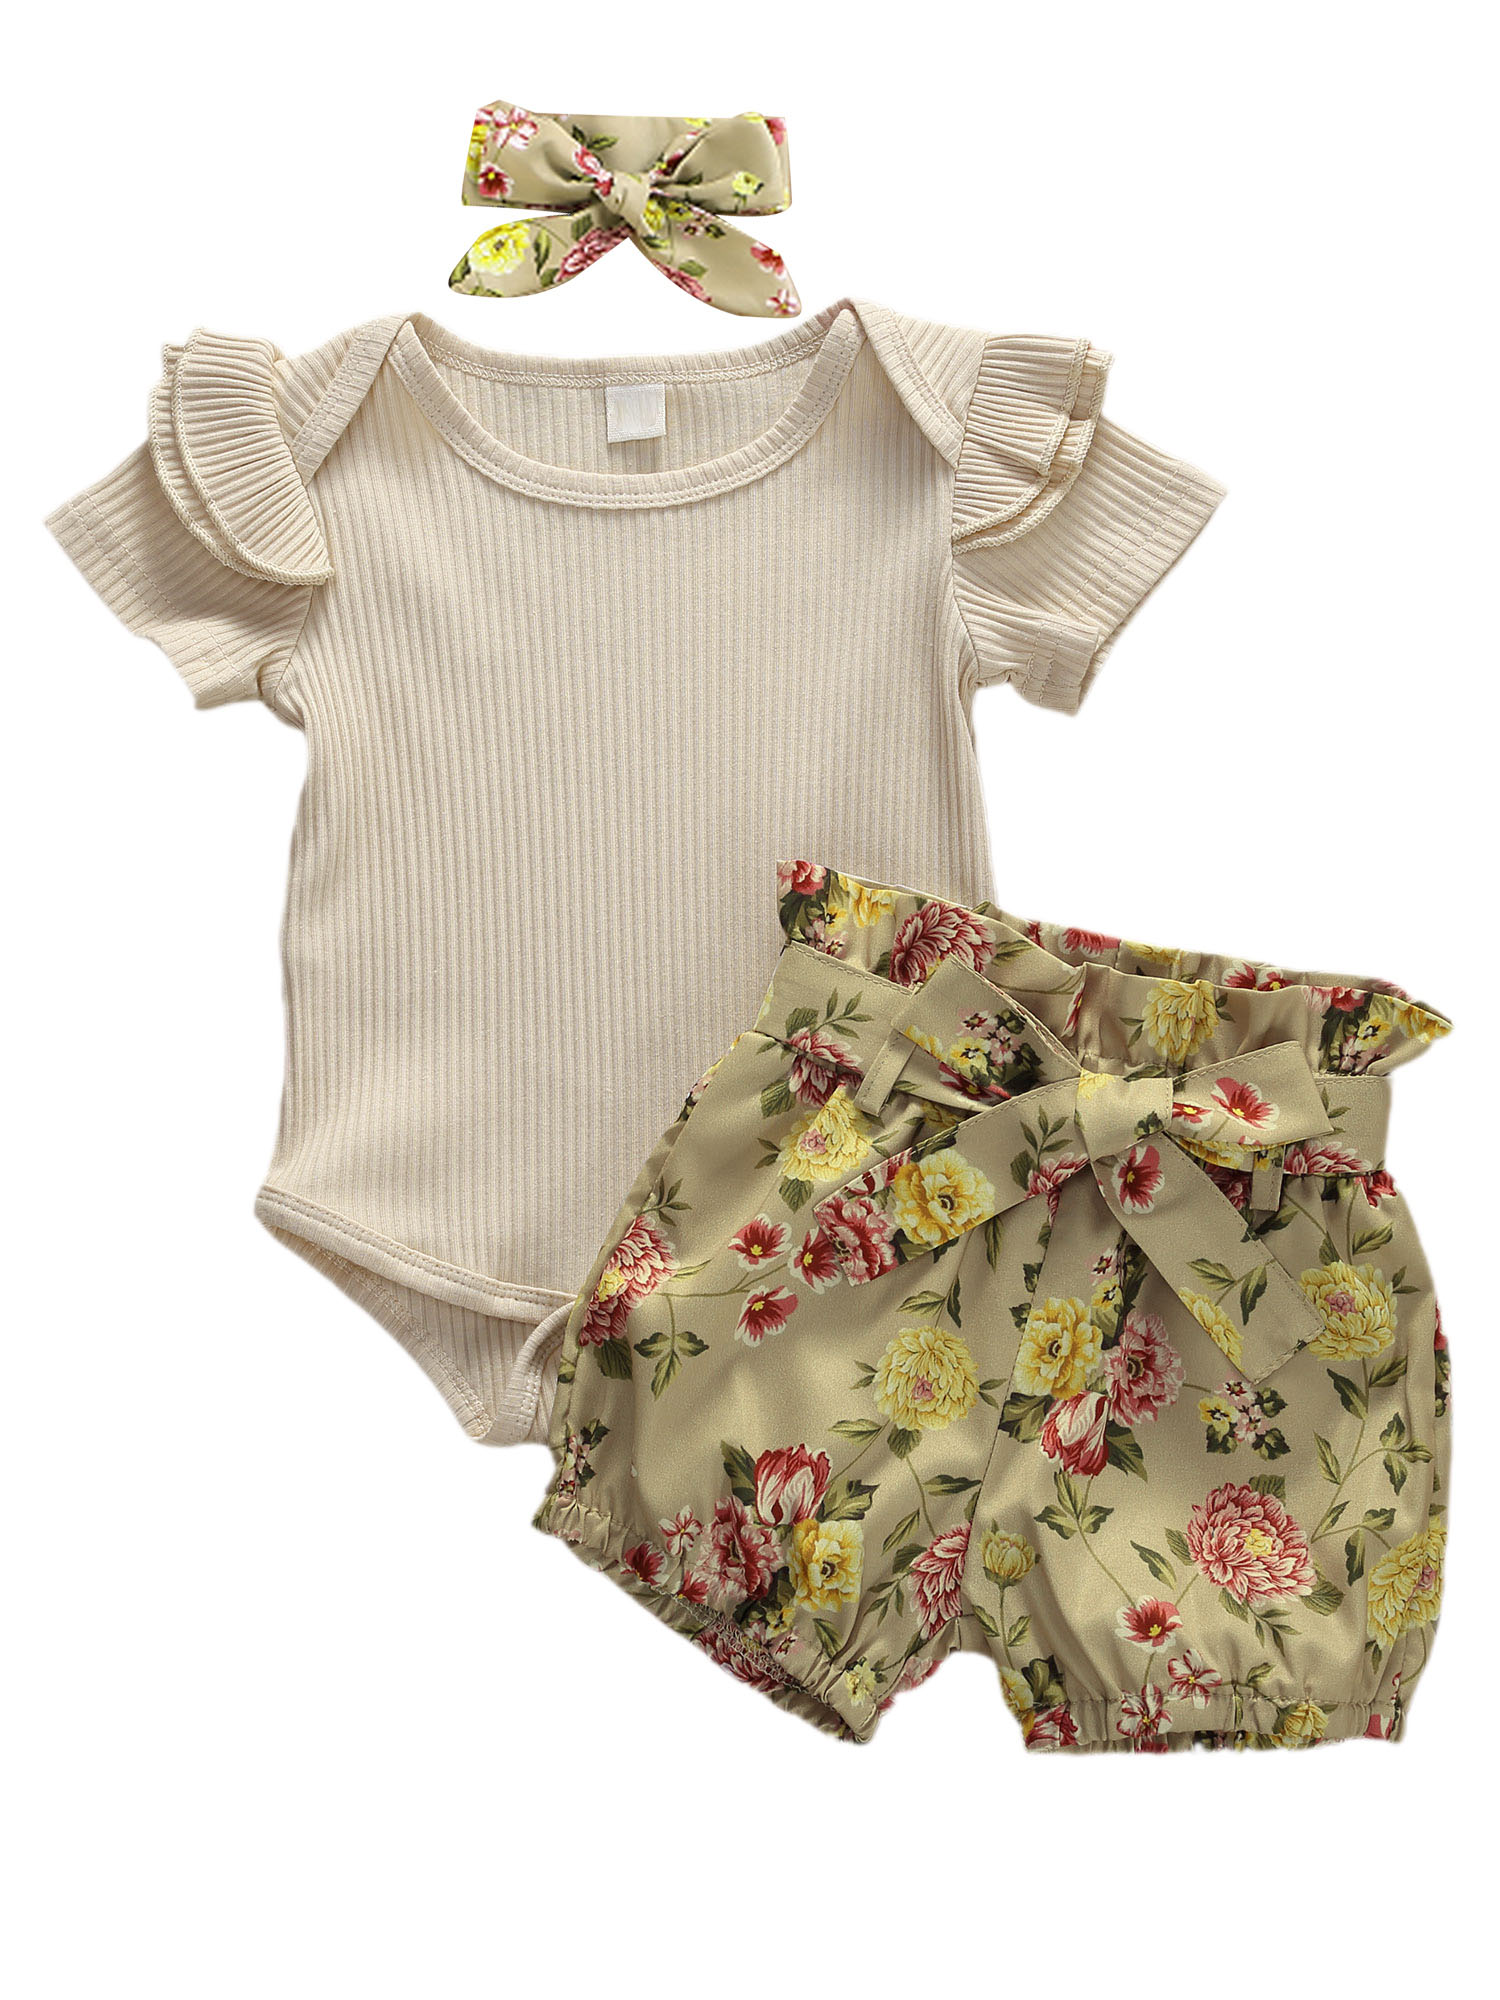 Newborn Infant Baby Girl Clothes Romper Onesie Pants Set Floral Outfits Cotton Baby Clothes for Girls 